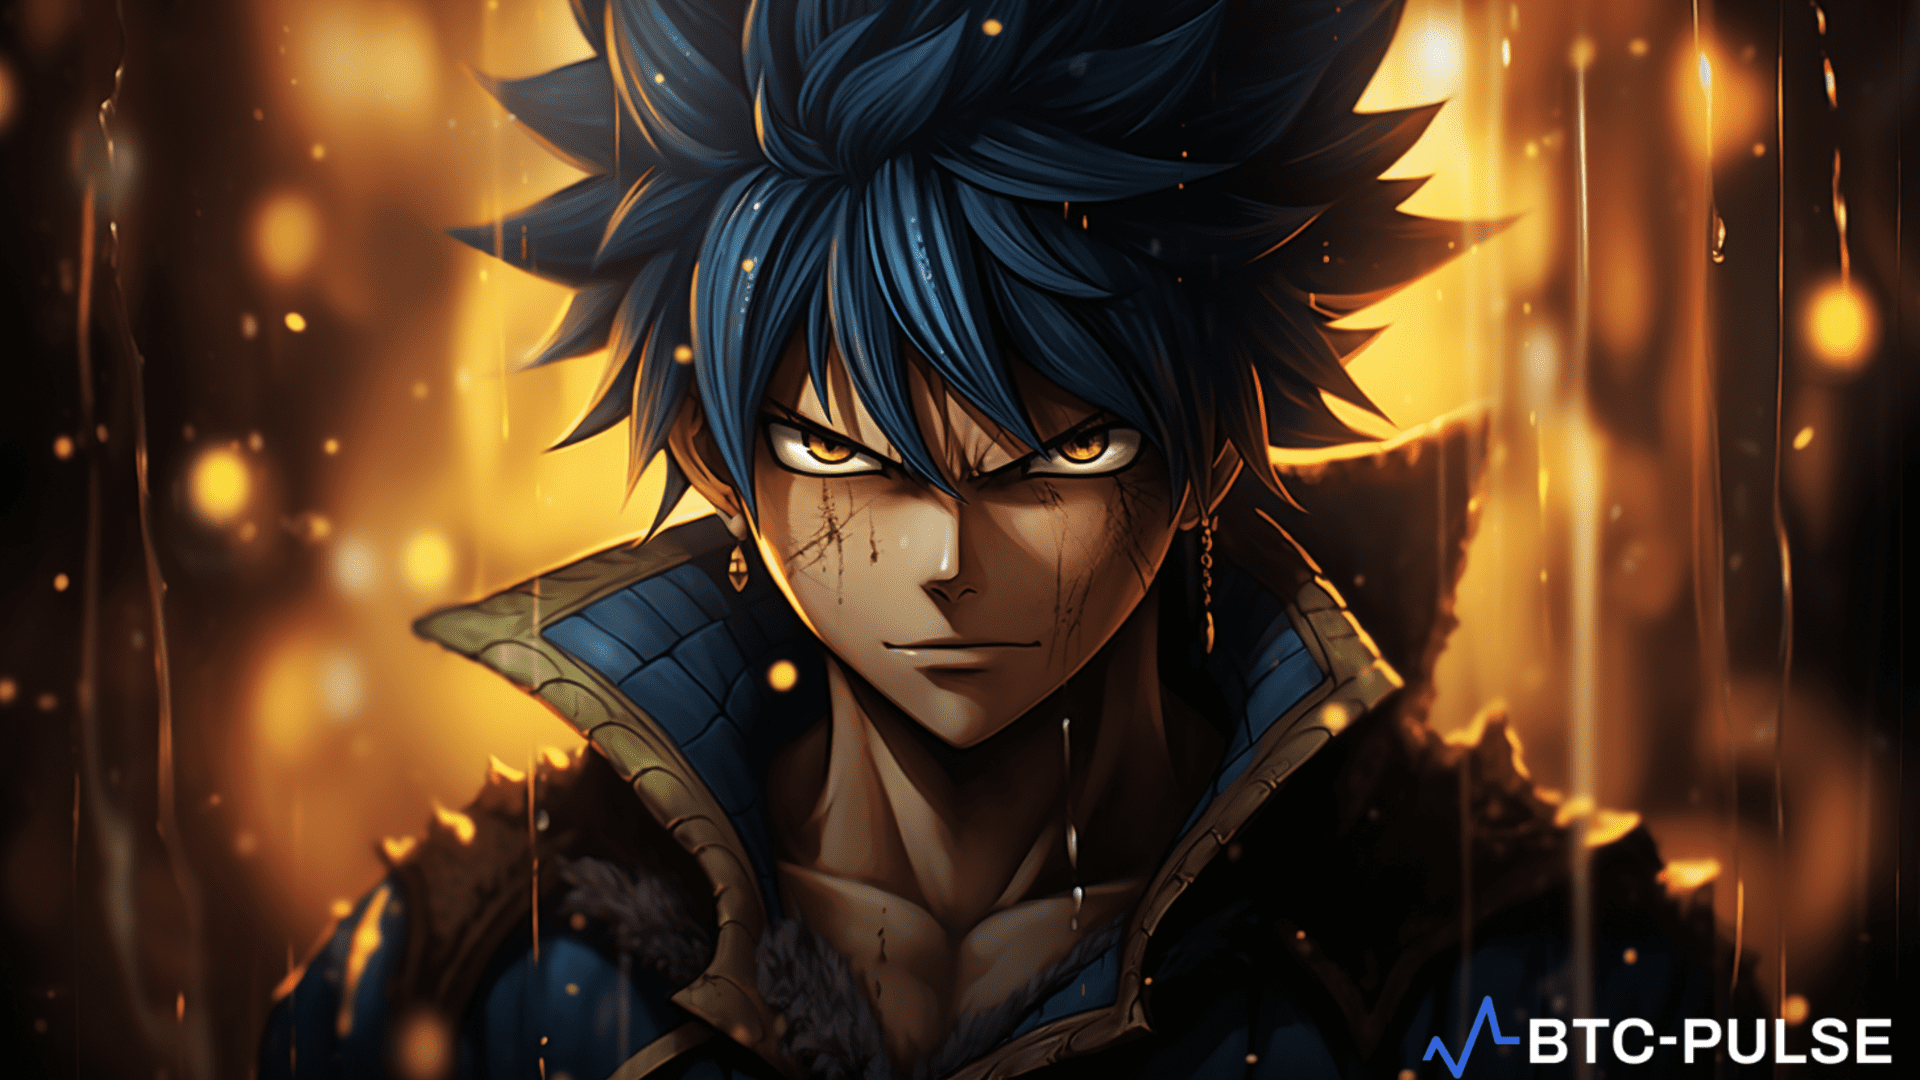 Animoca Brands Japan and Quidd to Release ‘FAIRY TAIL’ Digital Collectibles